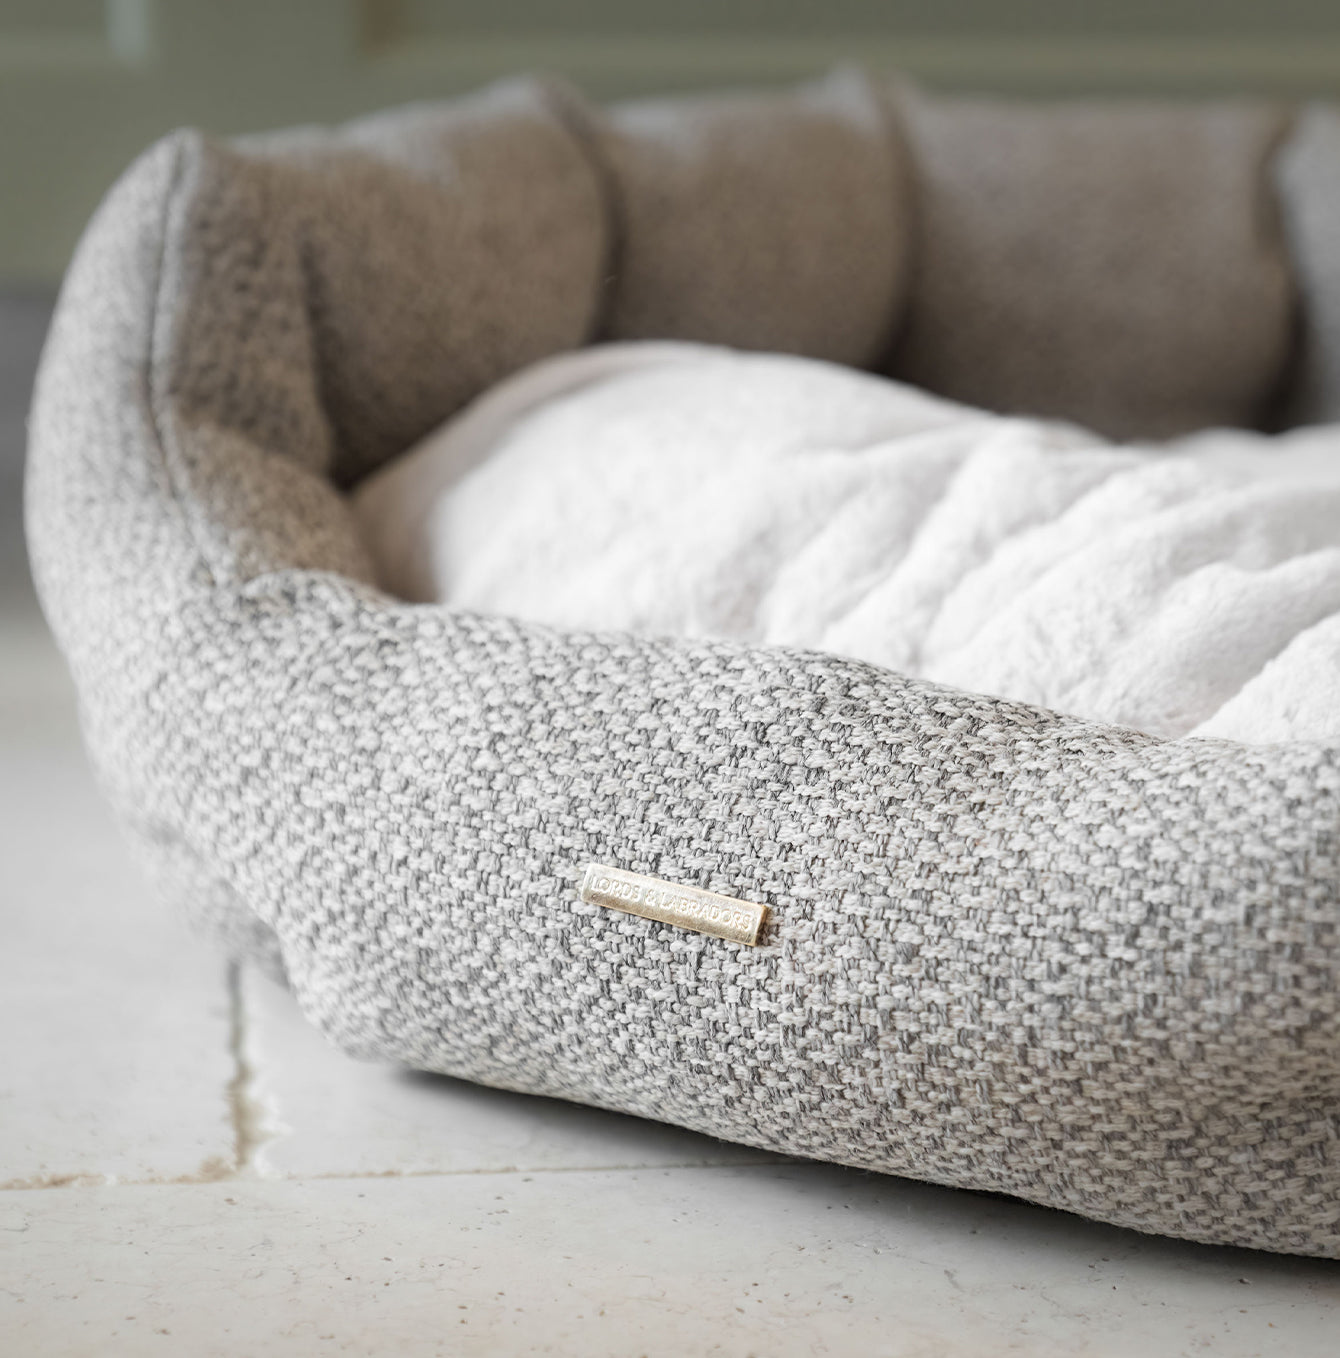 Discover our luxury Herdwick oval dog bed in beautiful pebble, the ideal choice for dogs to enjoy blissful nap-time, featuring reversible inner cushion with raised sides for dogs who love to rest their head for the ultimate cosiness! Handcrafted in Italy for pure pet luxury! Available now at Lords & Labradors US